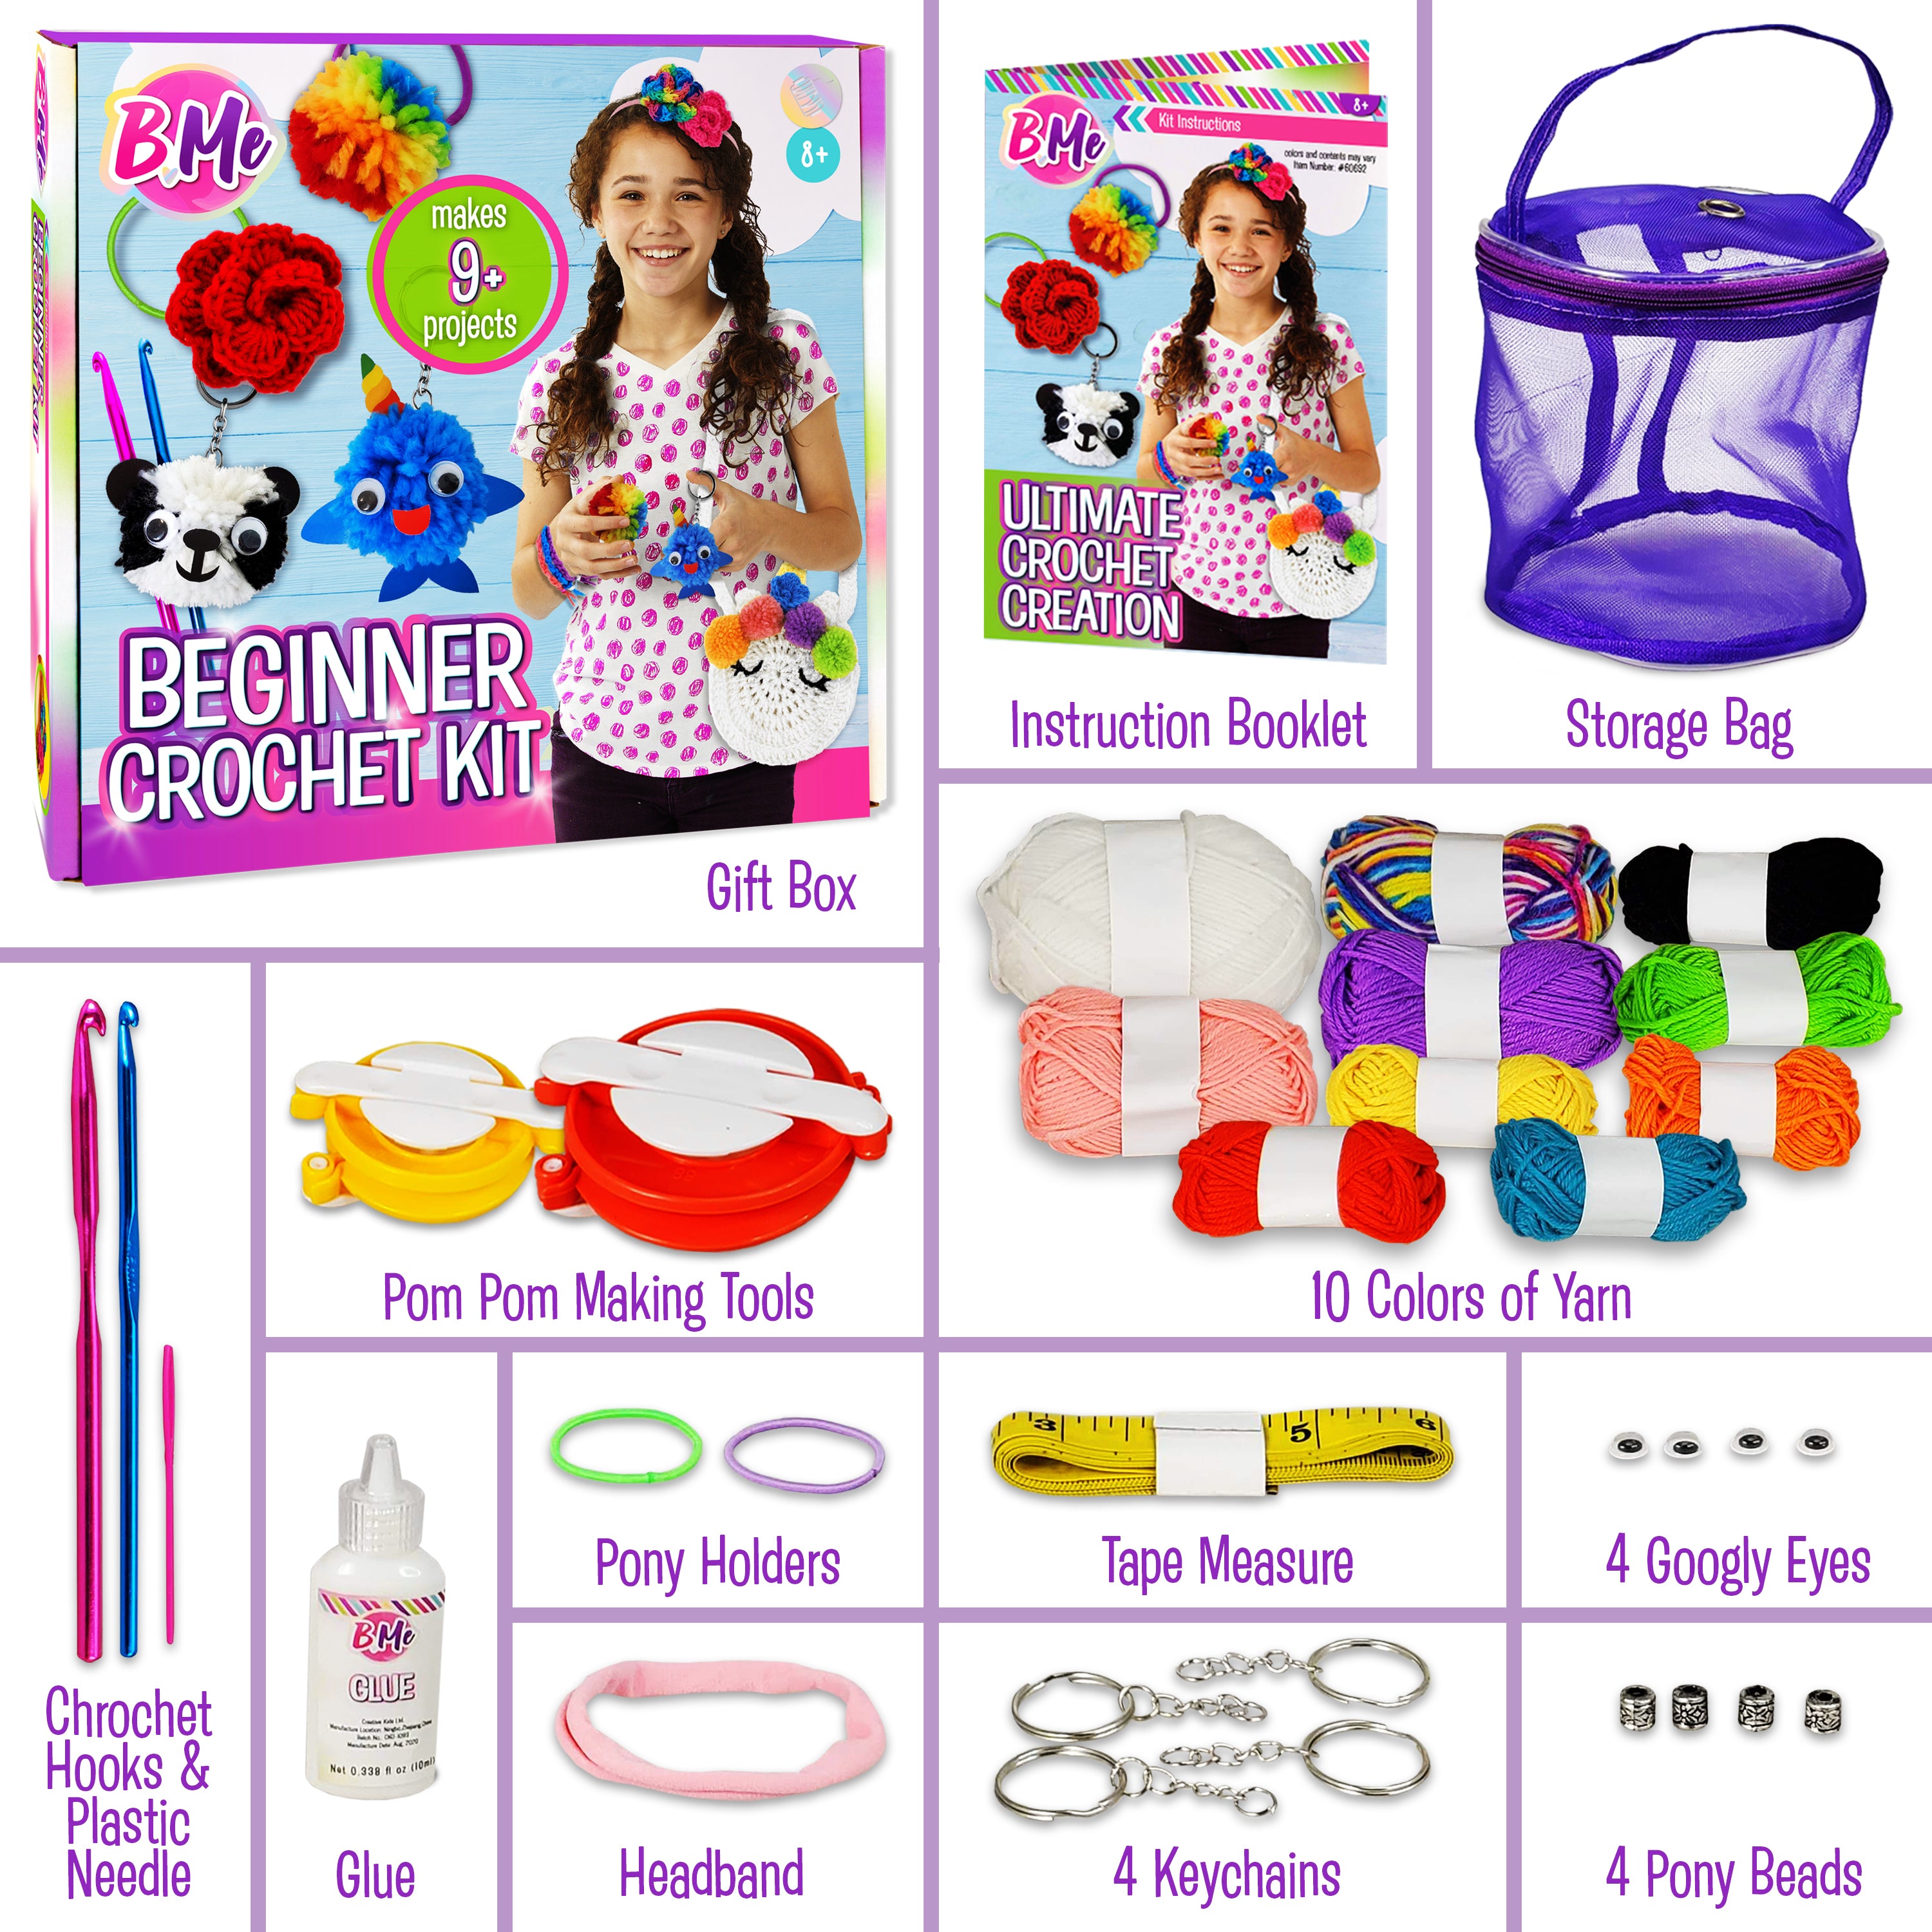  HDONYUi Crochet kit for Beginners for Adults and Kids